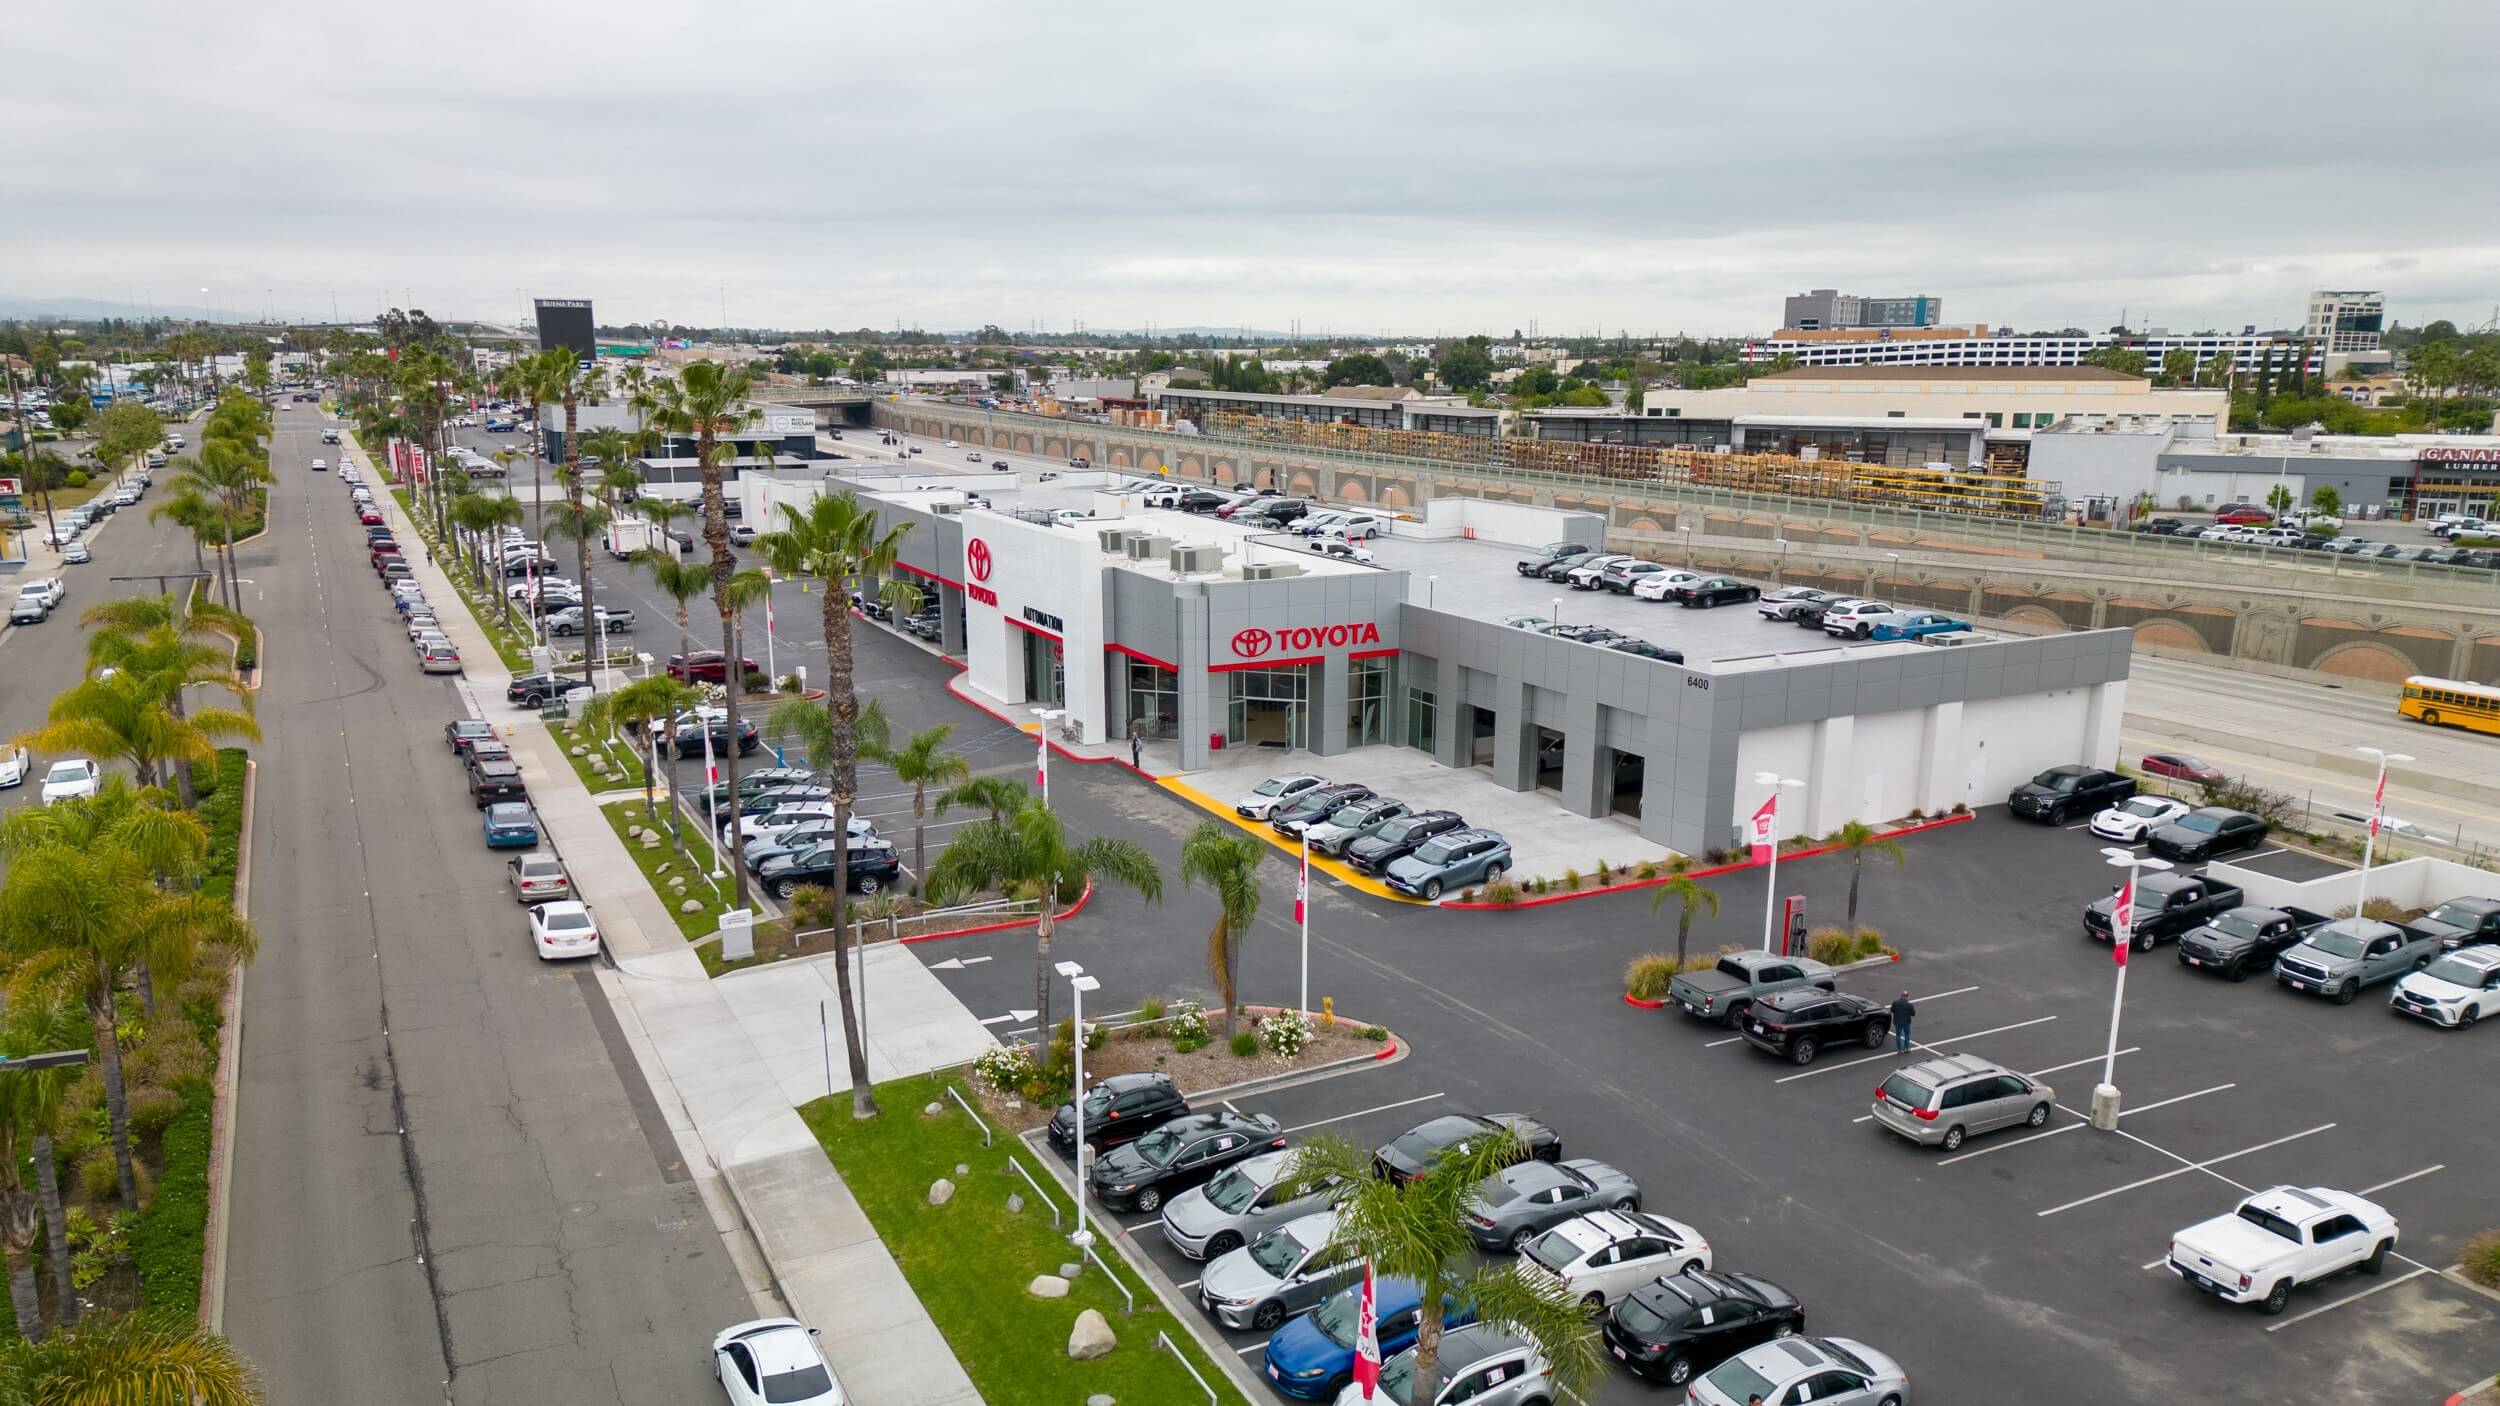 Exterior view of AutoNation Toyota Buena Park shot from a drone. Cloudy day, cars parked on the street with palm trees.